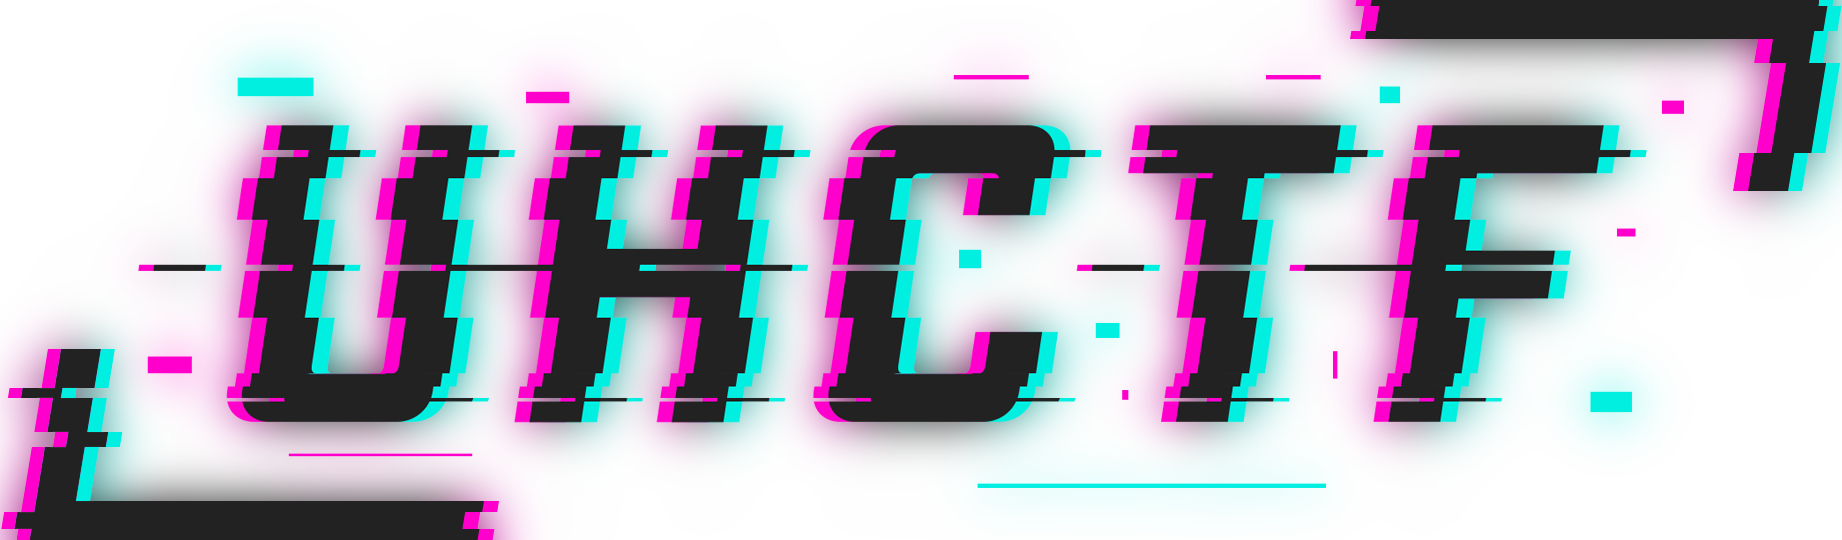 UHCTF logo with a glitch in the letters